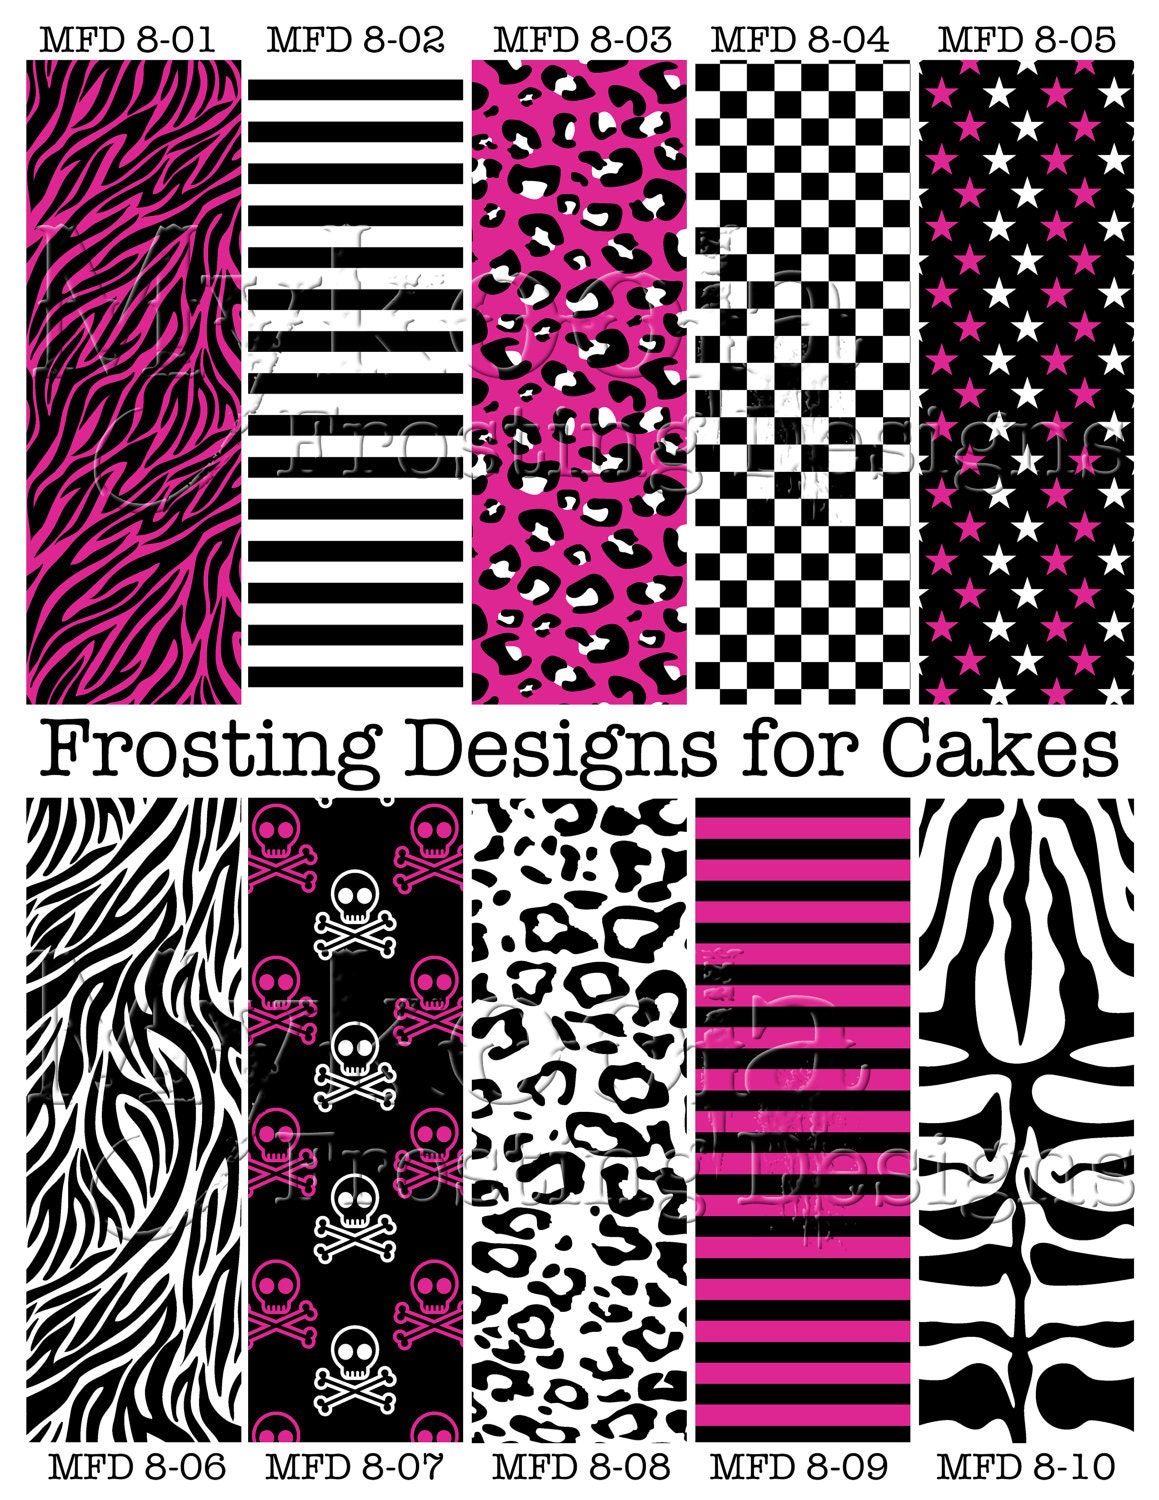 How to Decorate a Cake Wit
h Royal Icing Designs | eHow.com